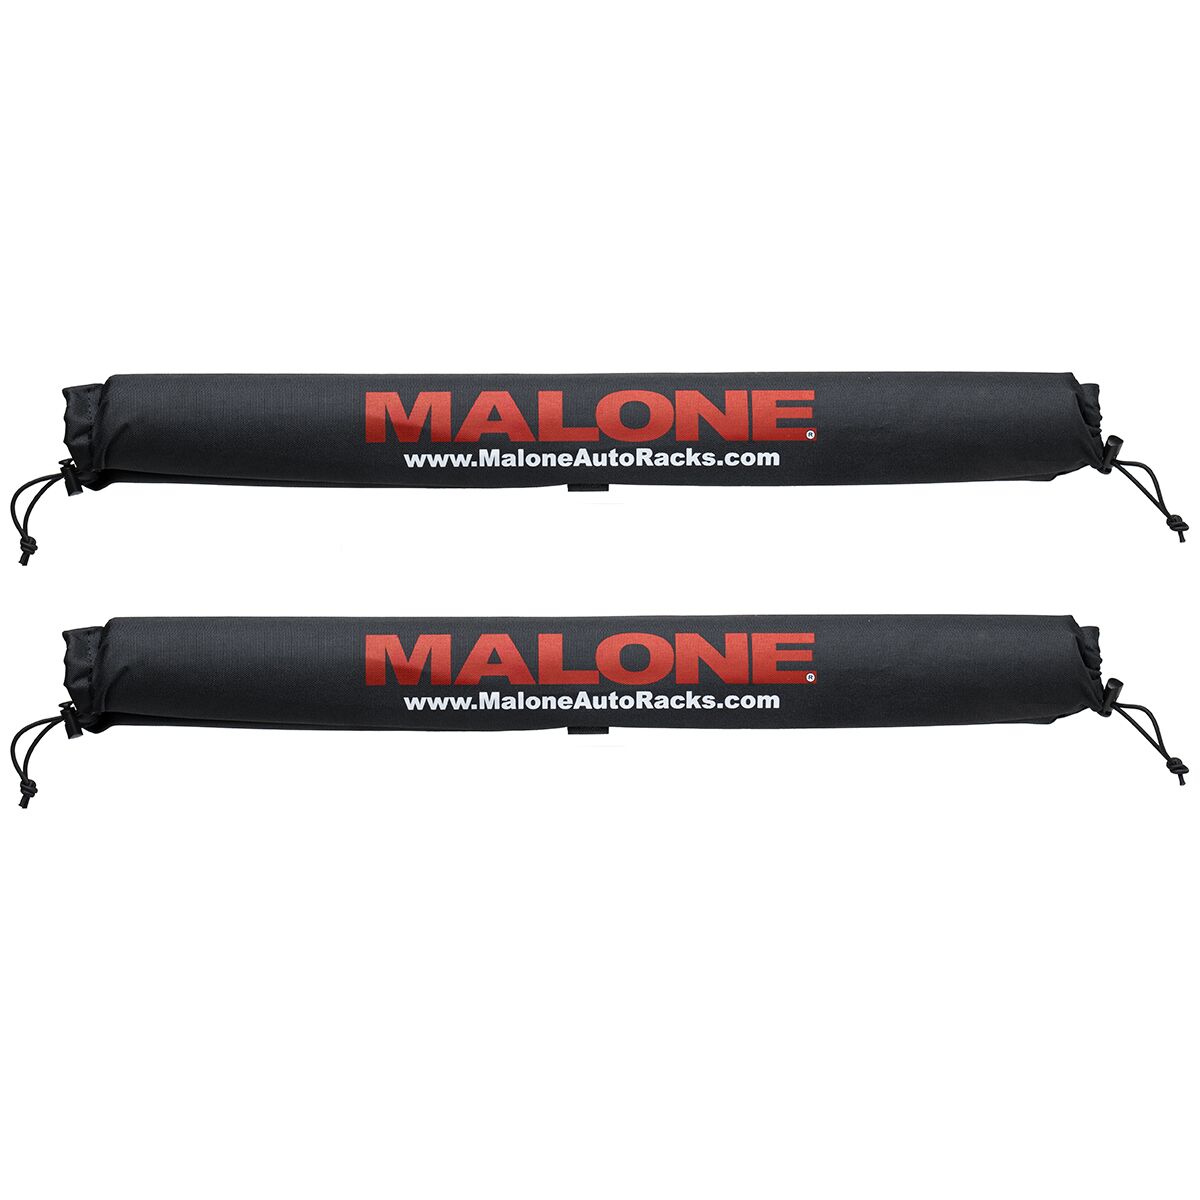 Malone Auto Racks 25in Roof Rack Pads - 2-Pack